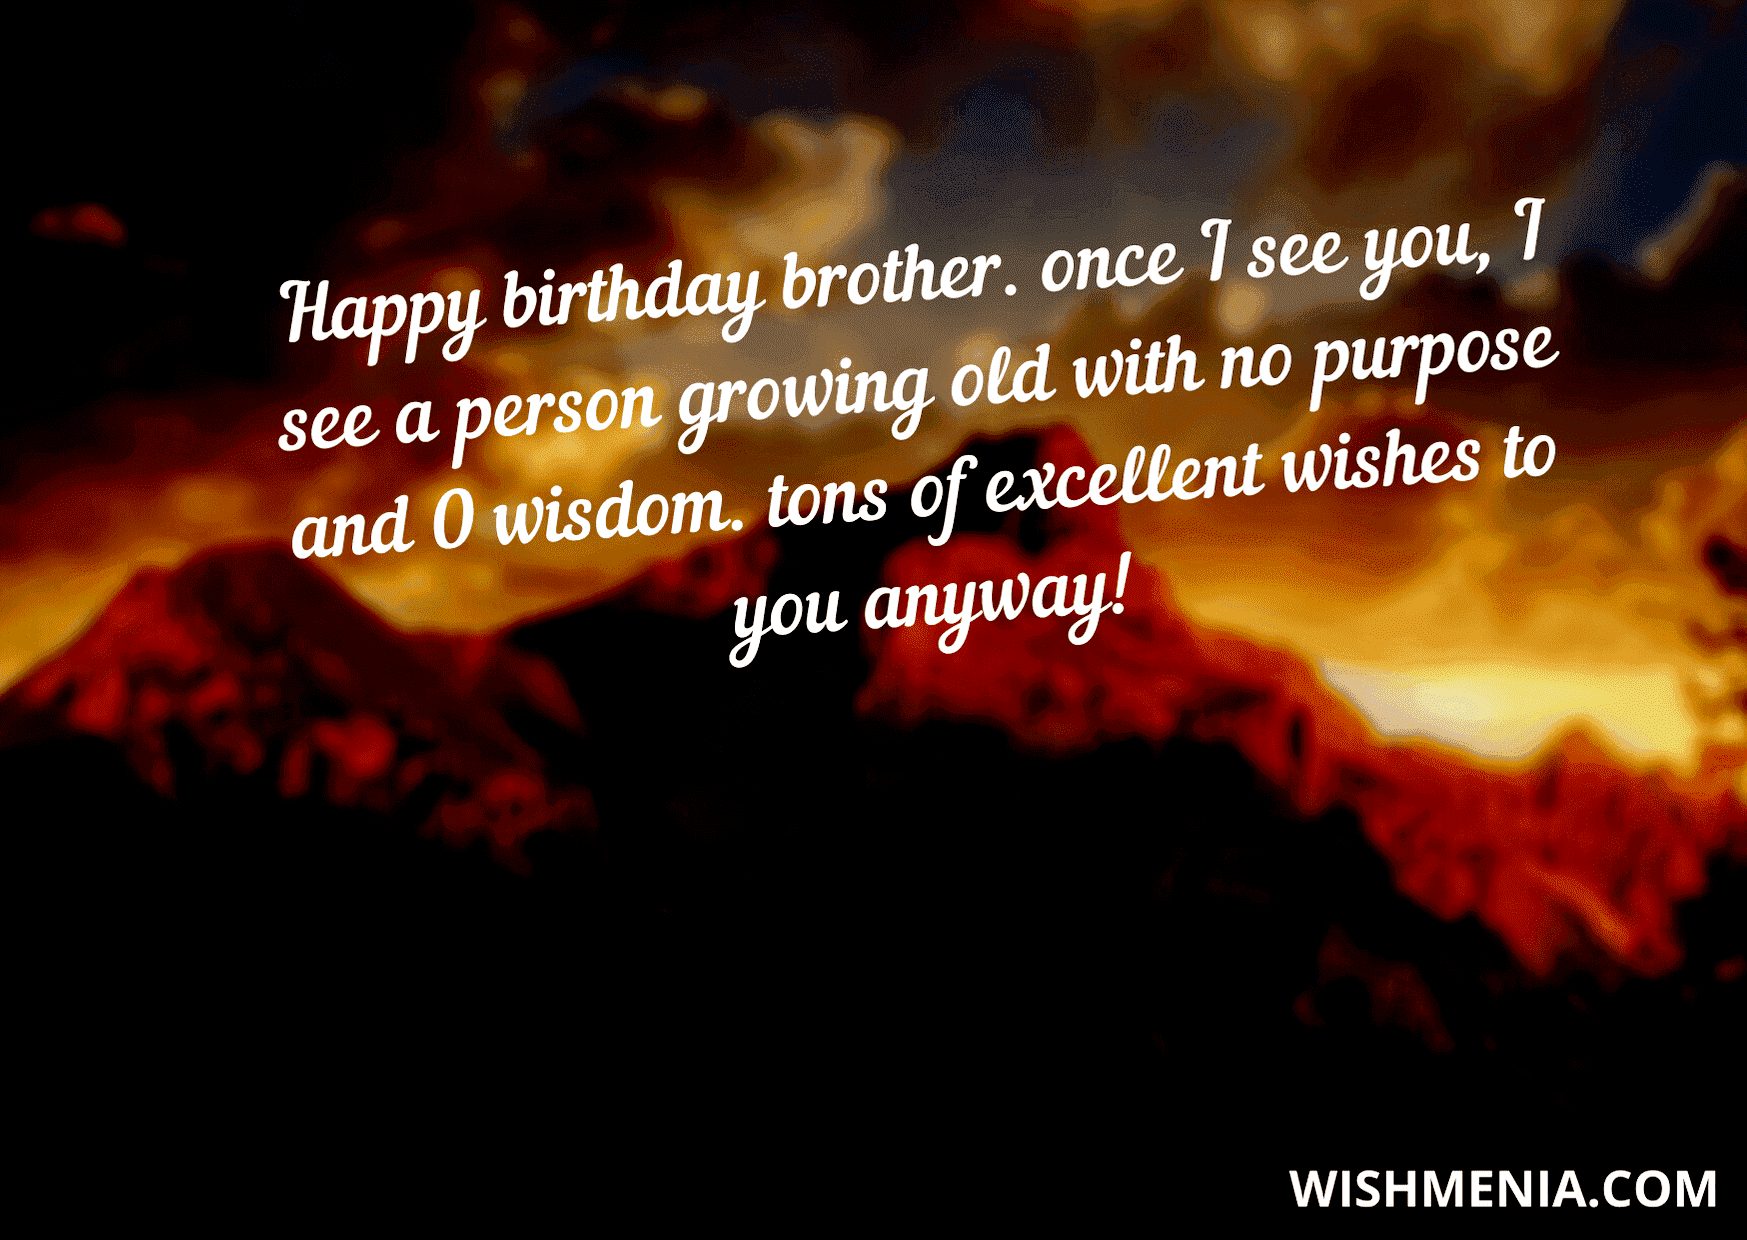 lovely brother wishes 